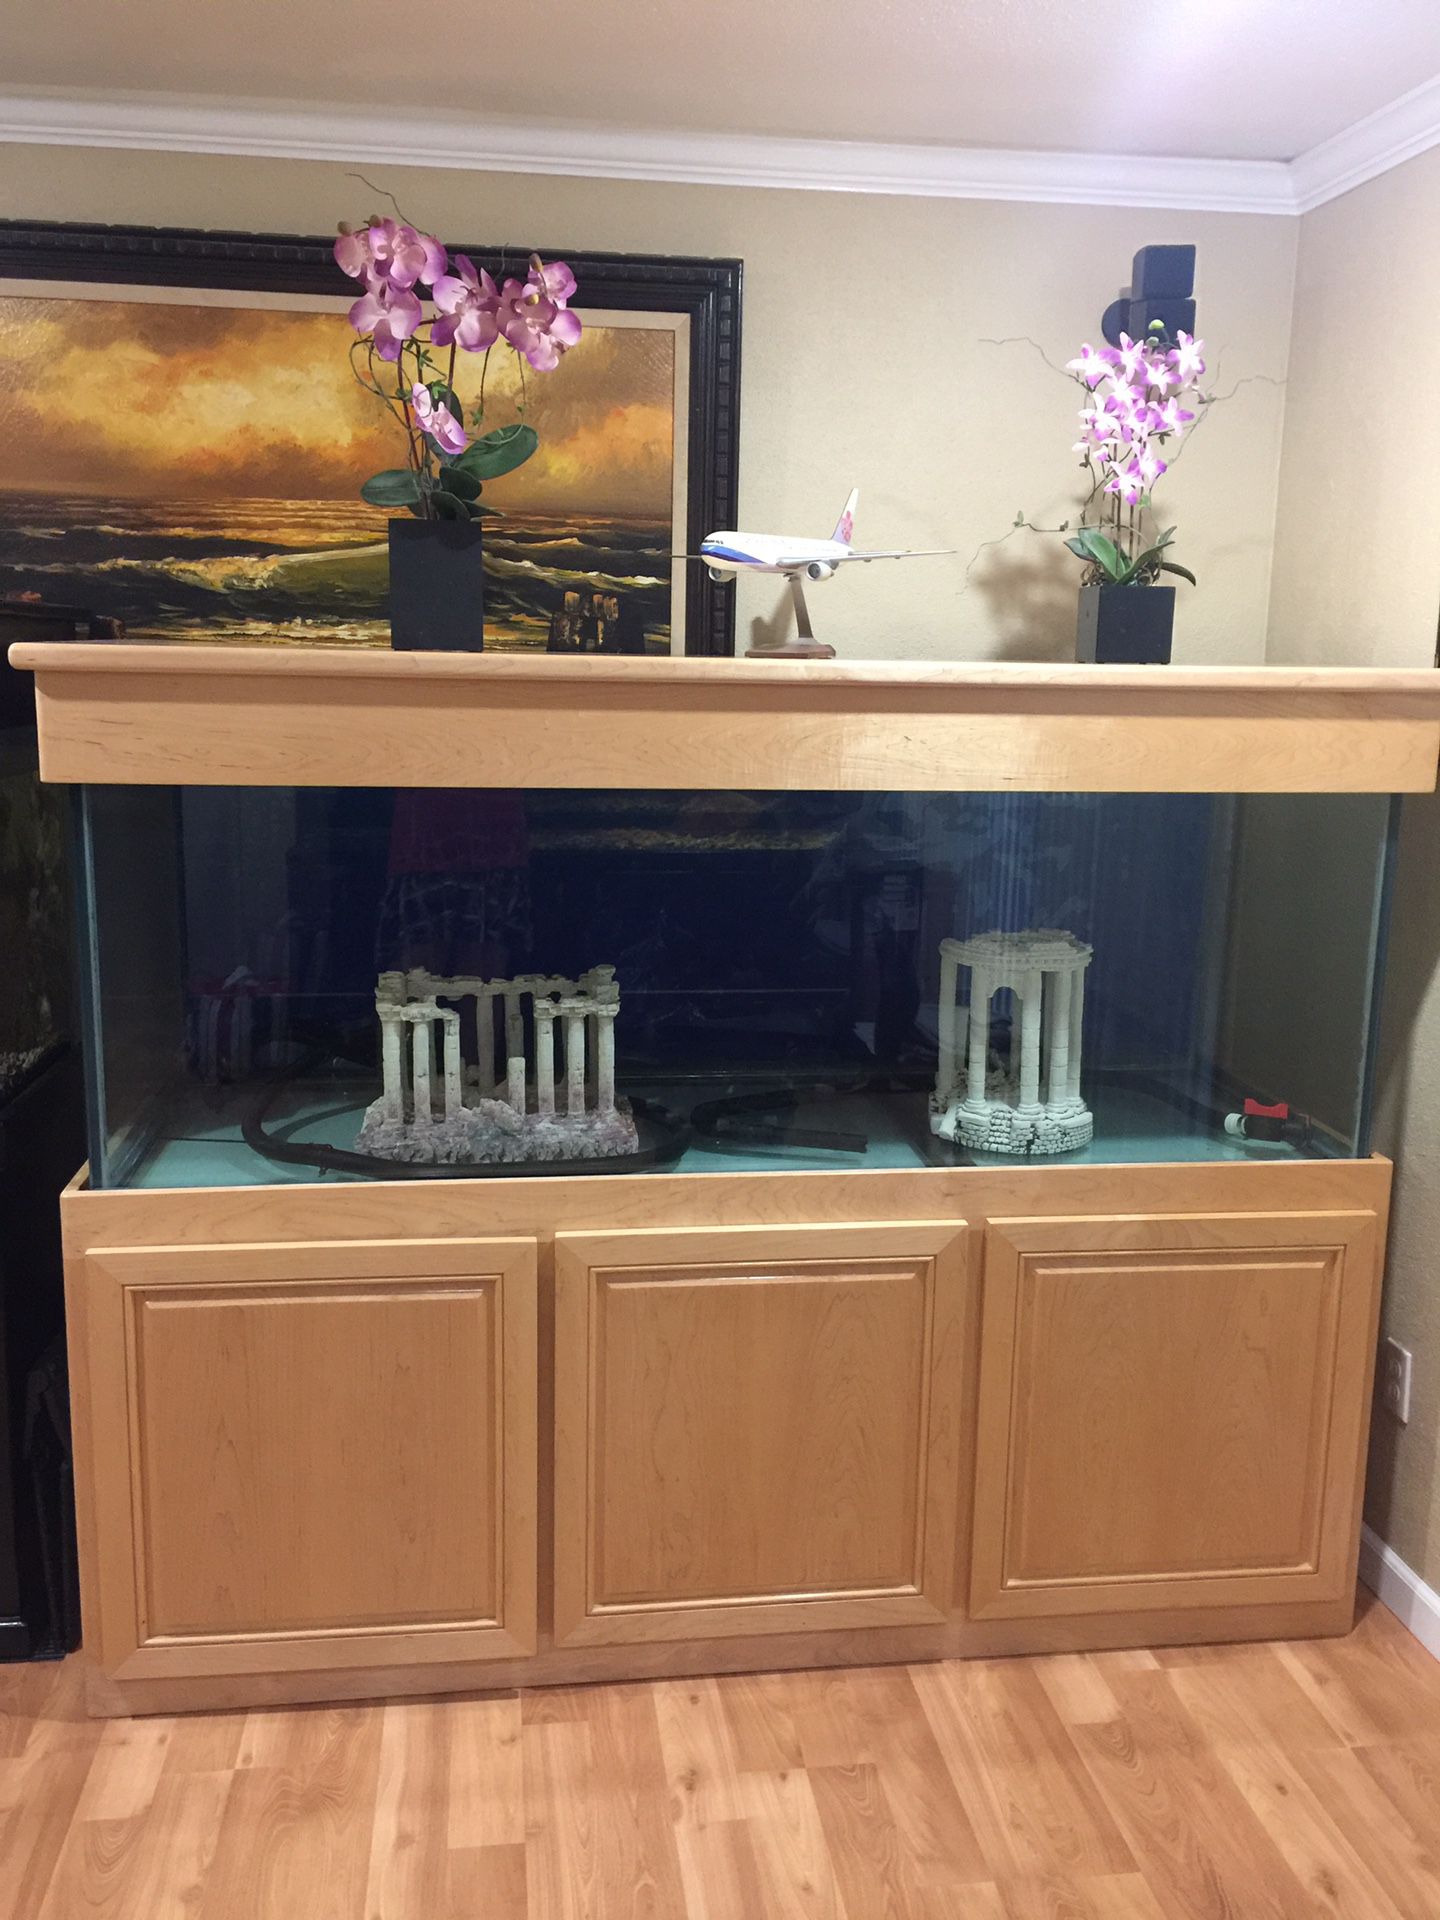 Fish tank 180 gallons come with filter, rooks, light and decorations , Fish tank wide size 7 , deep 2 fit , T 2 fit